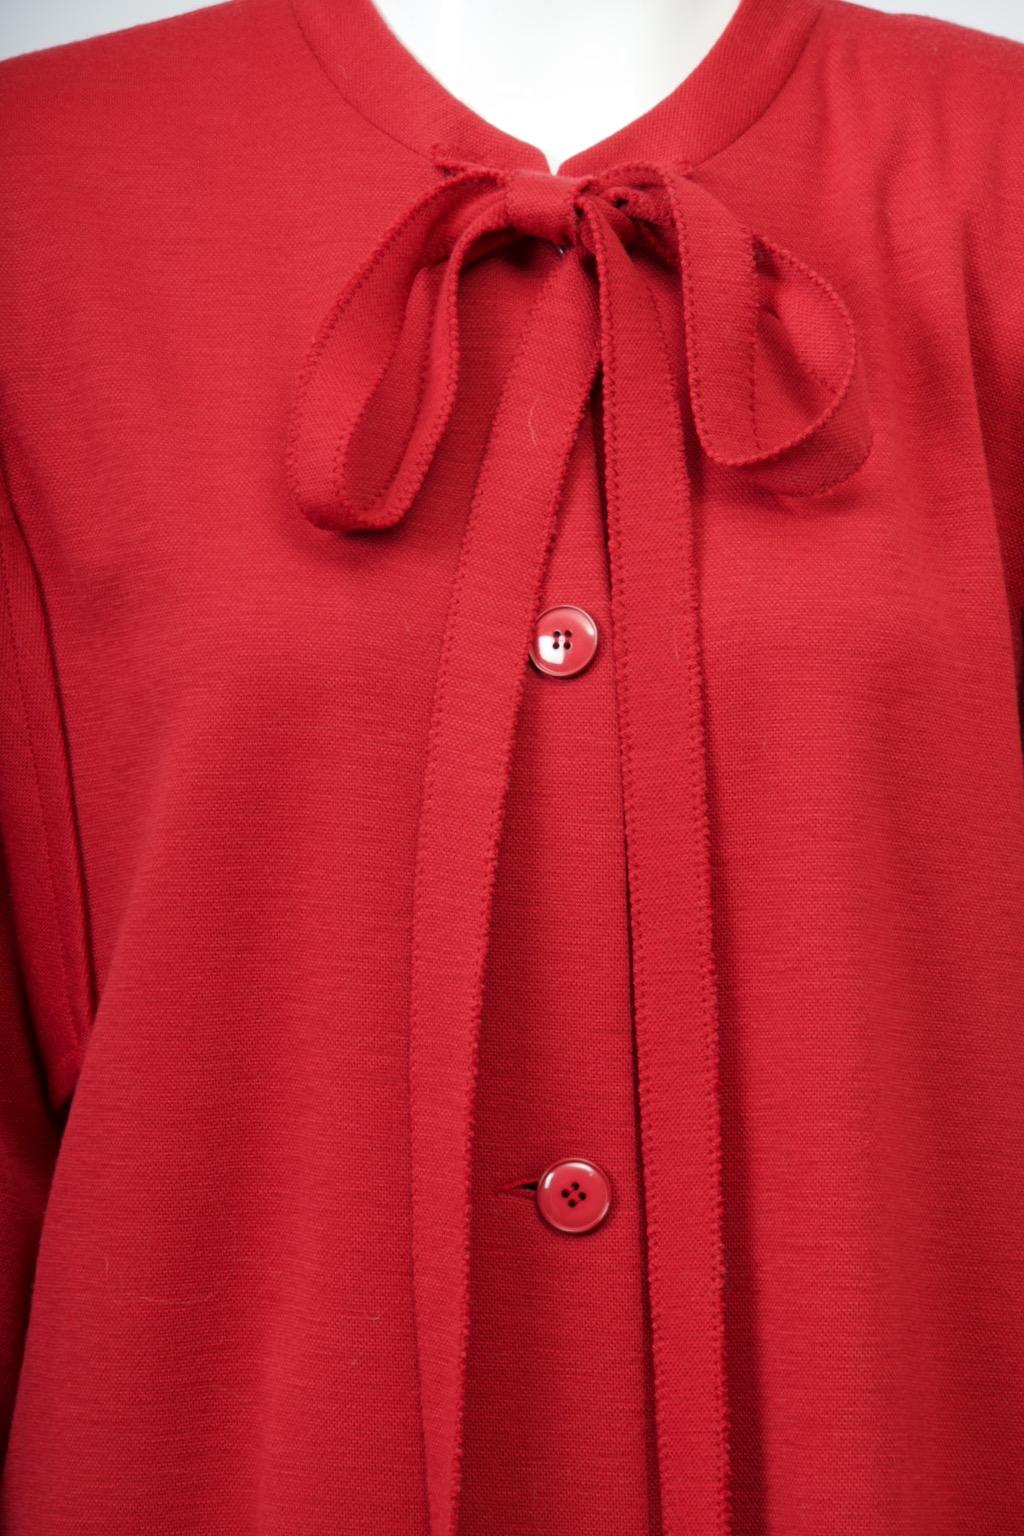 Sonia Rykiel 1980s red double knit wool coat or sweater dress featuring the designer's characteristic bow at the neck, accomplished by tying the long knit strips attached to the front of the collar. This version is unique for the cut of its wide